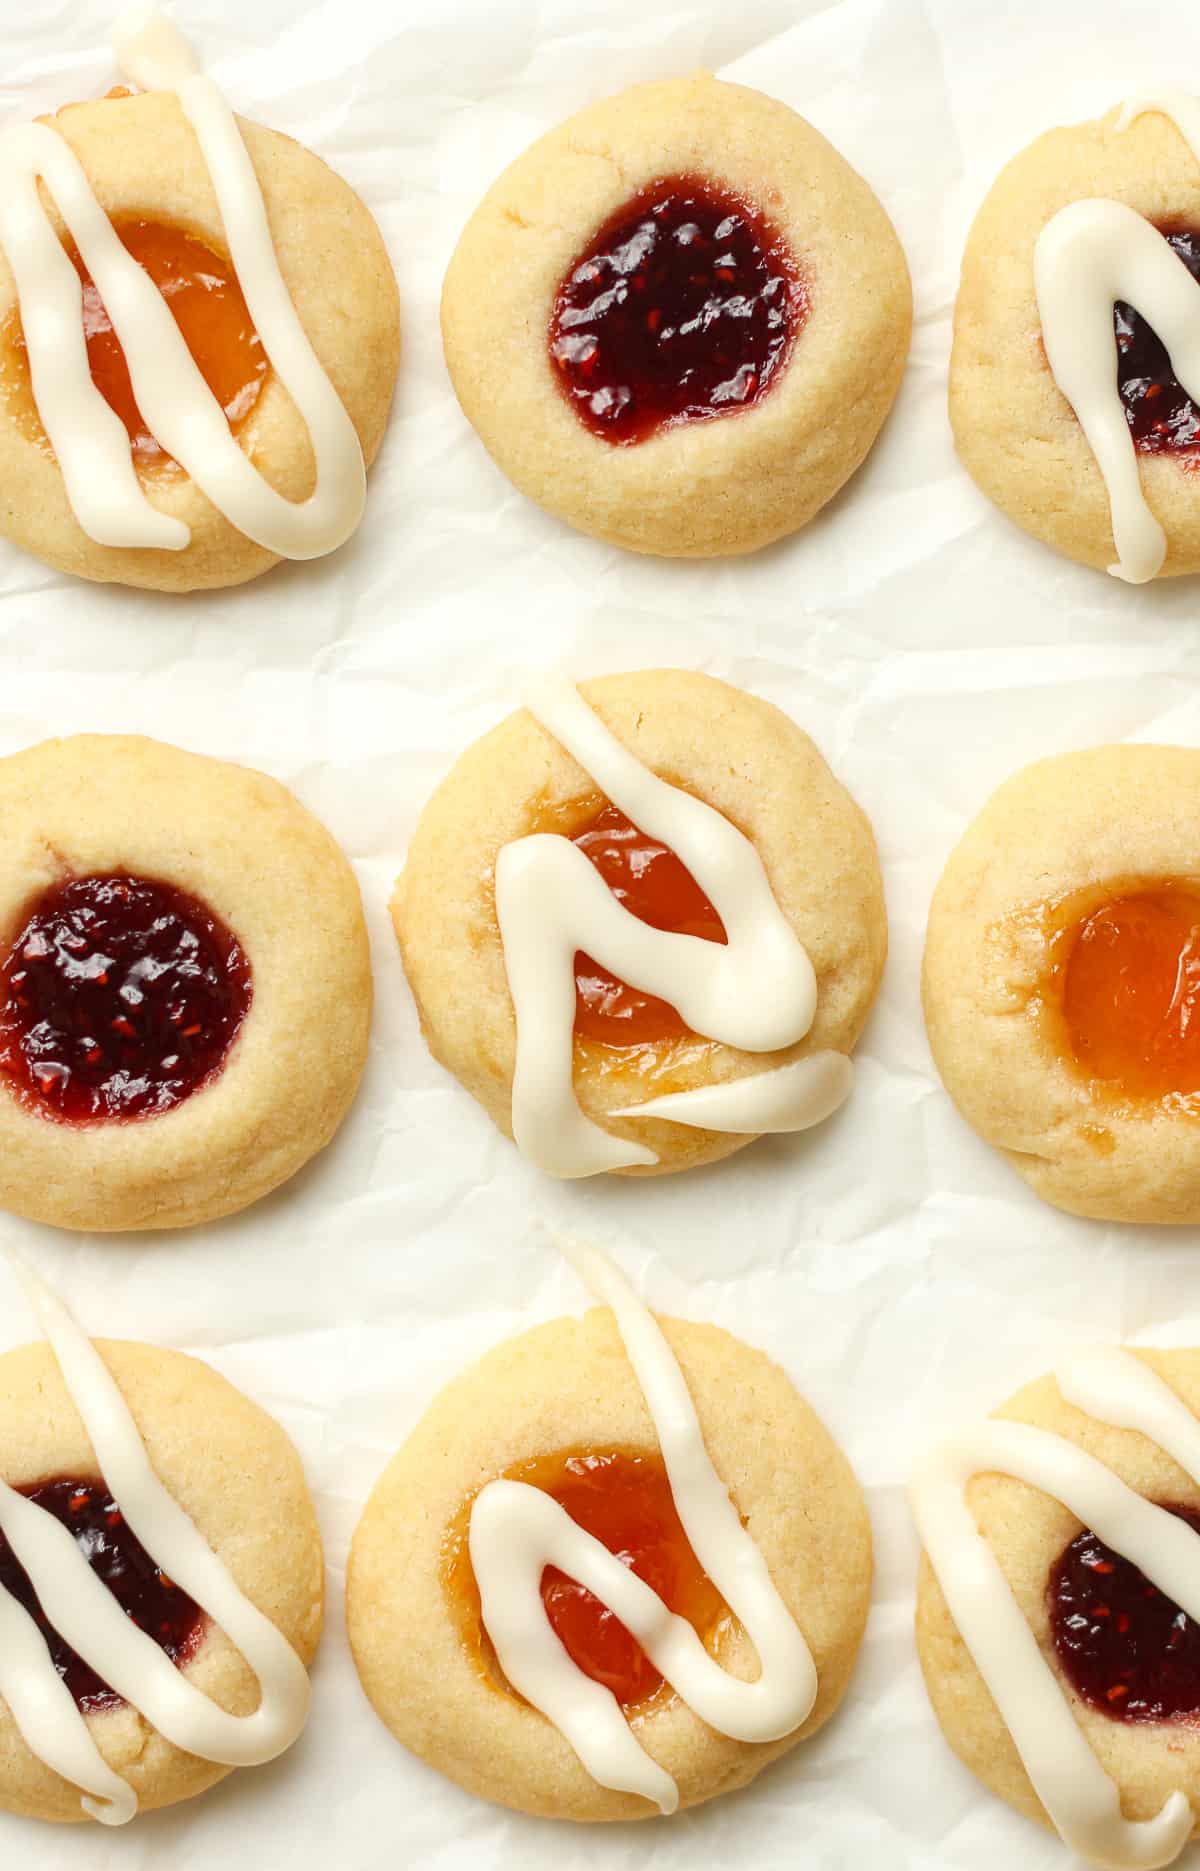 Closeup on some glazed shortbread cookies.